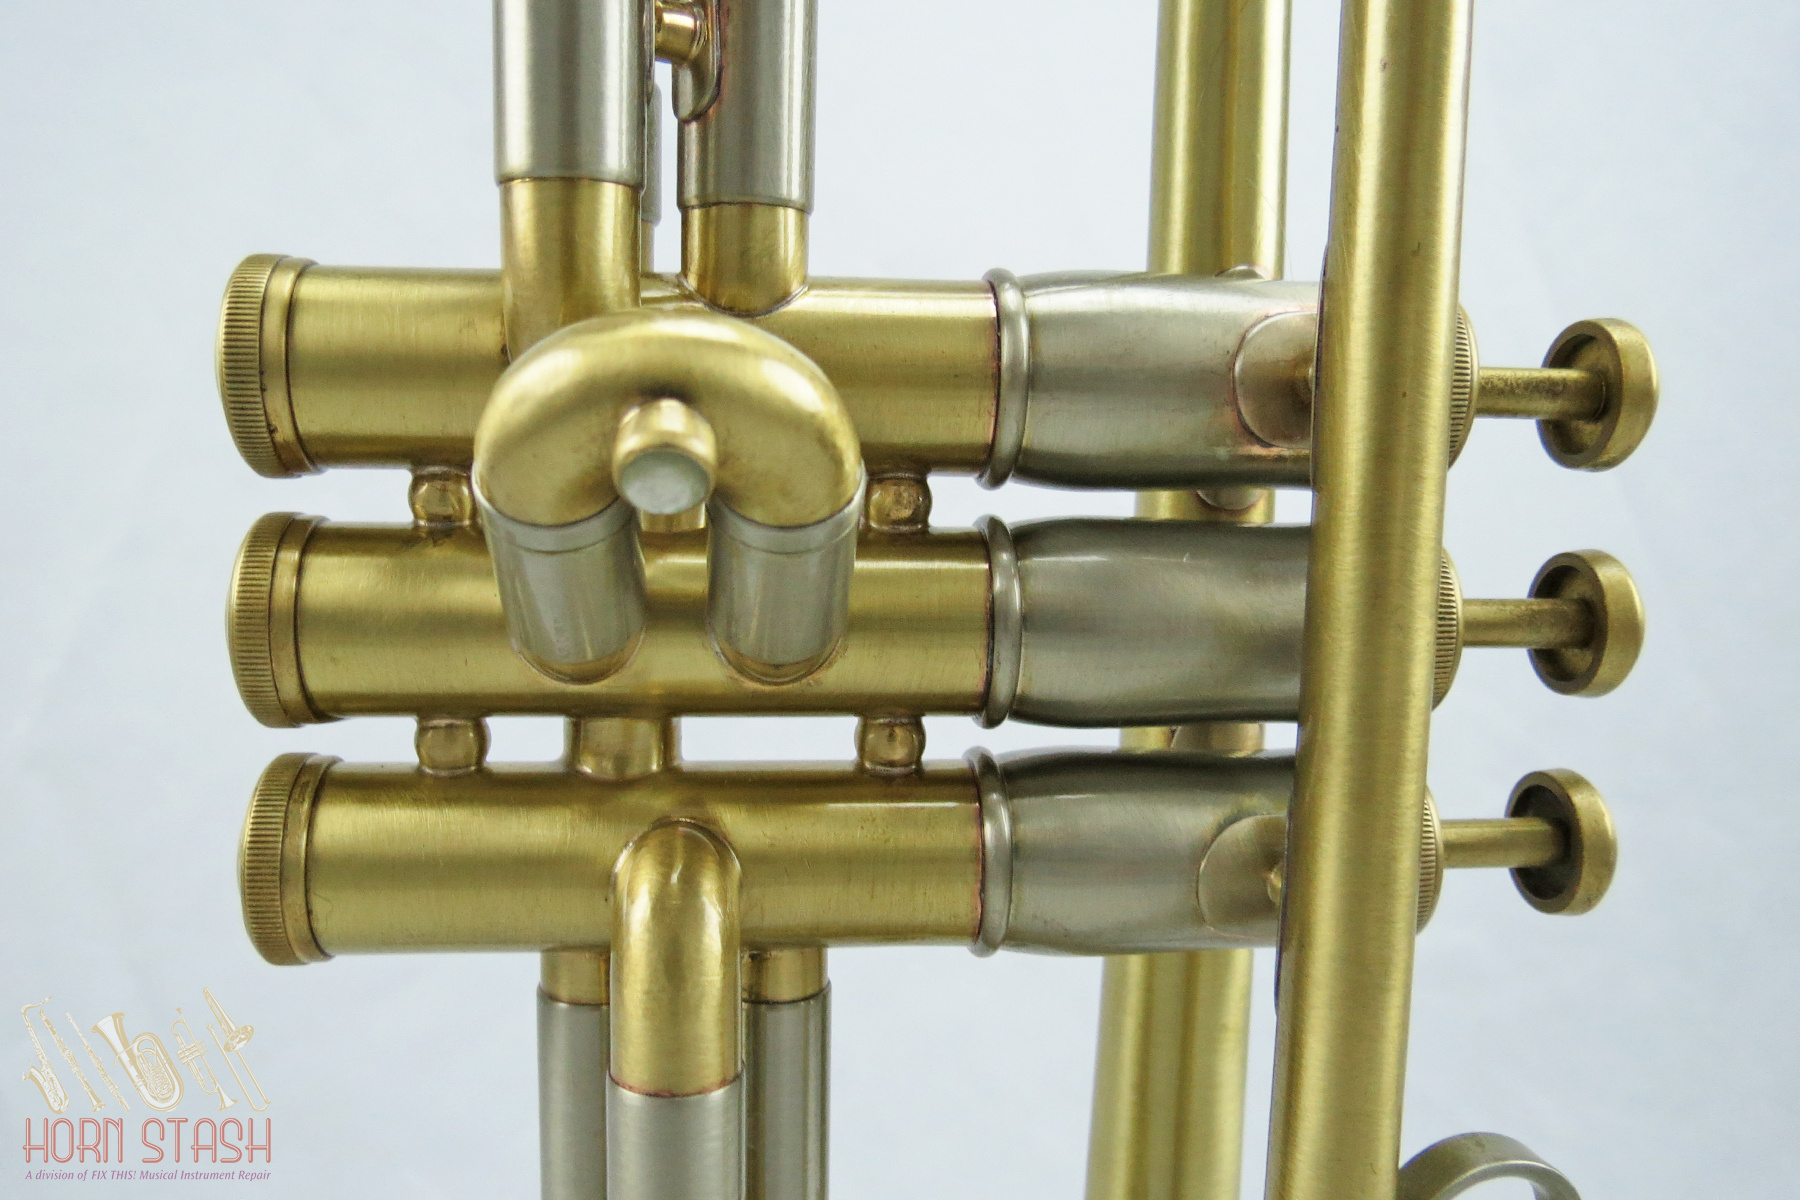 Olds Used Olds Super Bb Trumpet - 6794XX